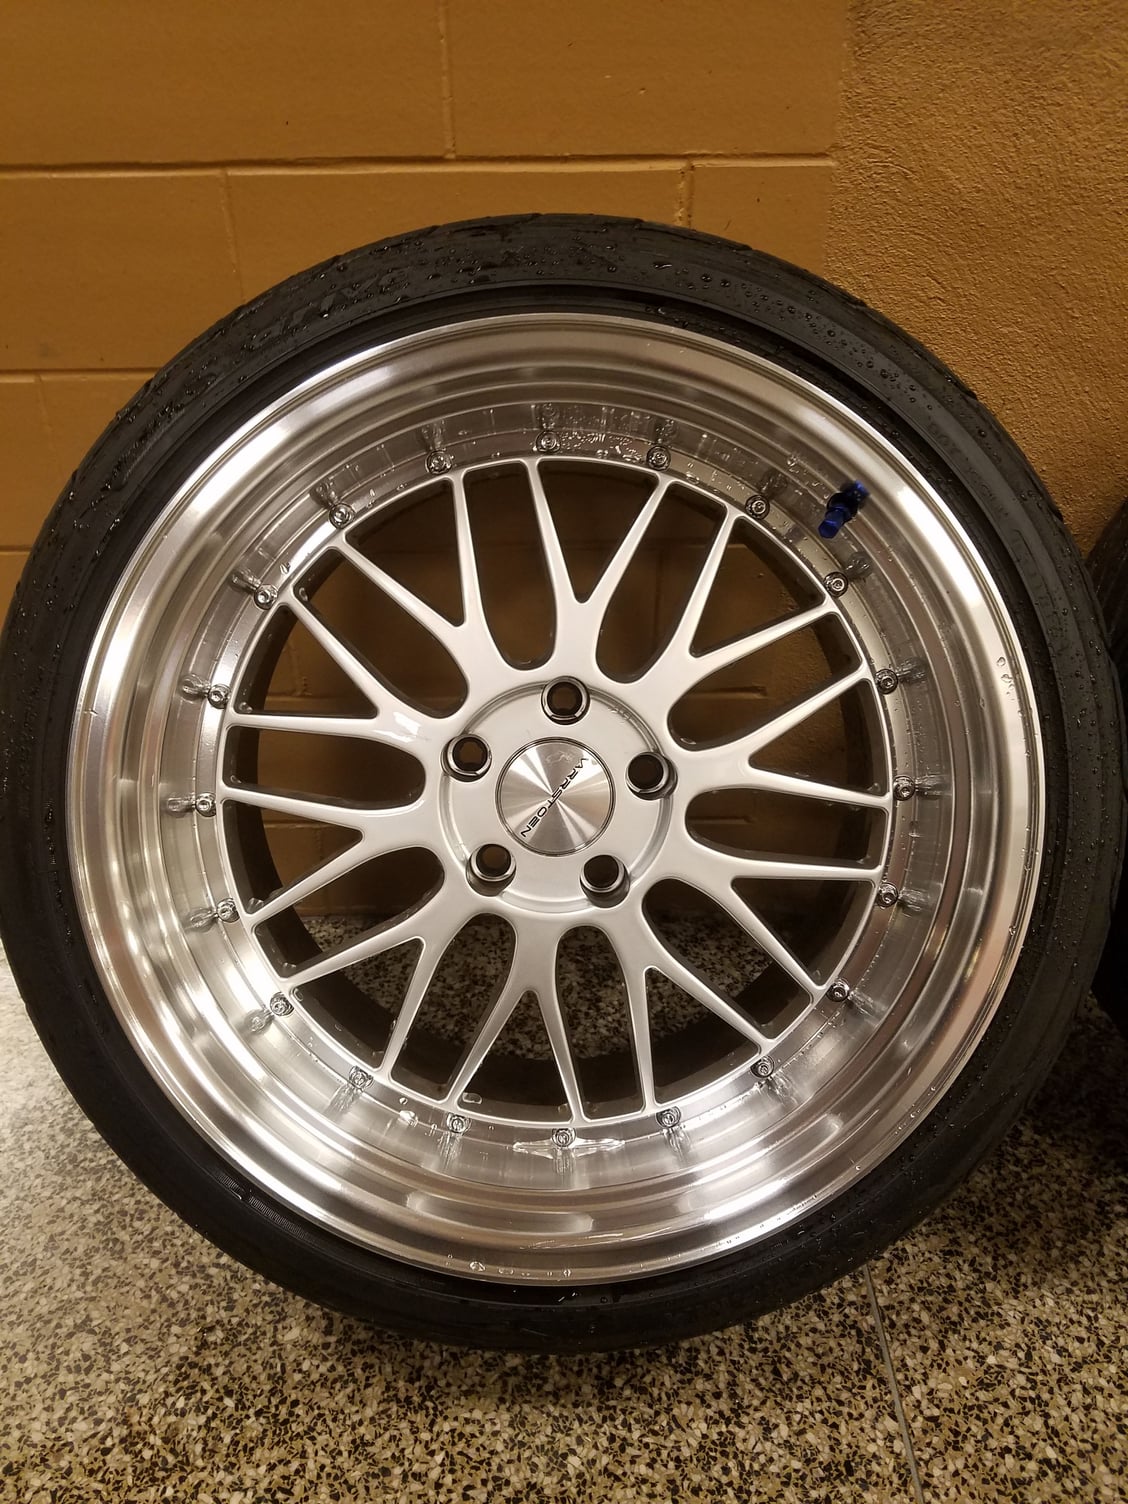 Wheels and Tires/Axles - SOLD: Varrstoen ES1 Staggered Setup - Used - 2004 to 2008 Acura TL - New Brunswick, NJ 08901, United States